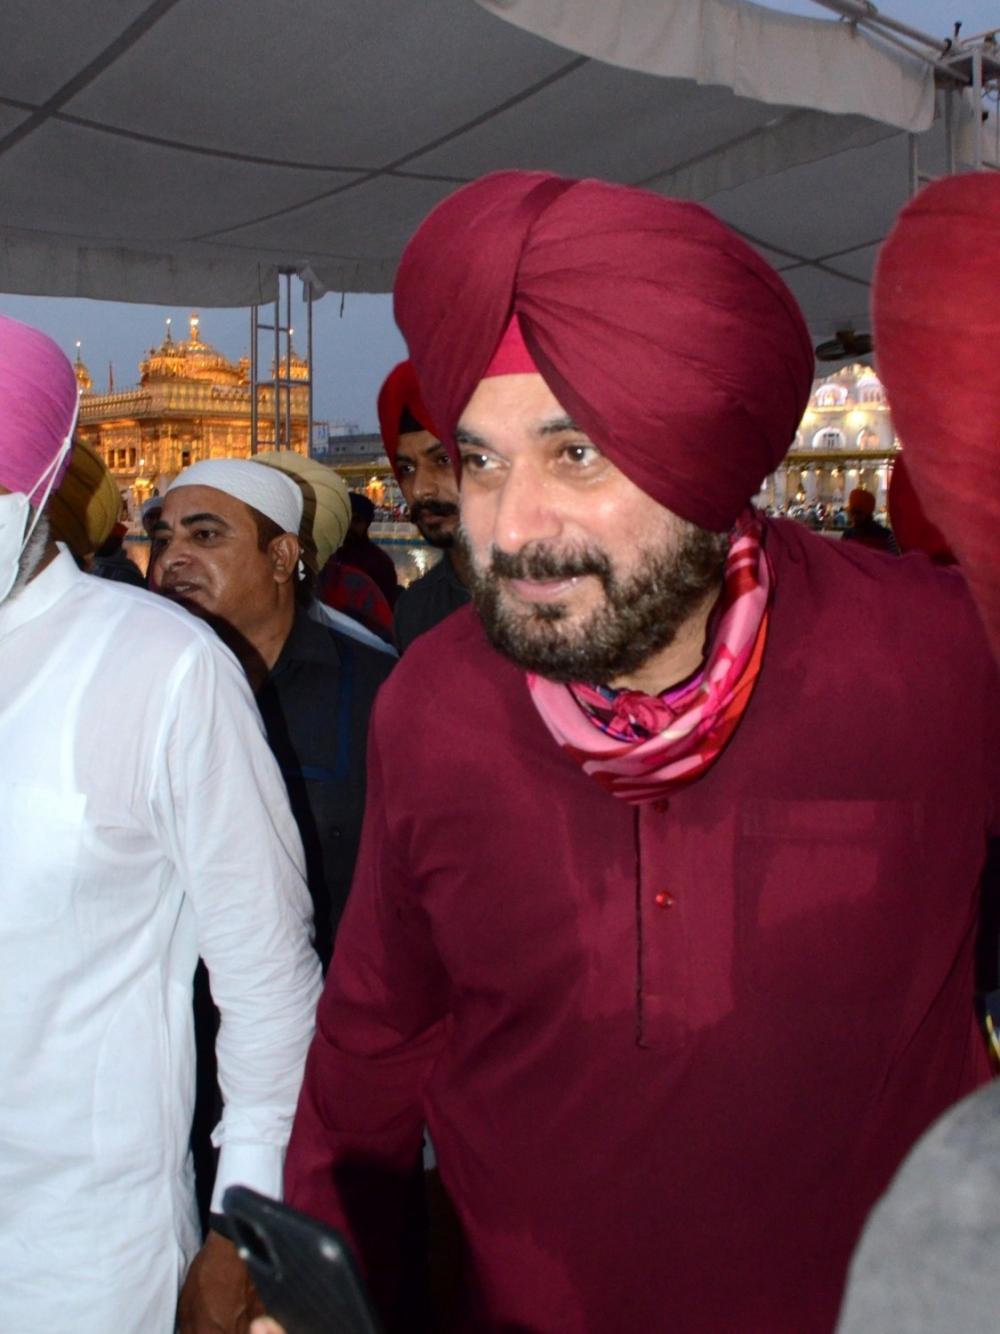 The Weekend Leader - Report on drugs to see light of day after over 2 yrs delay: Sidhu